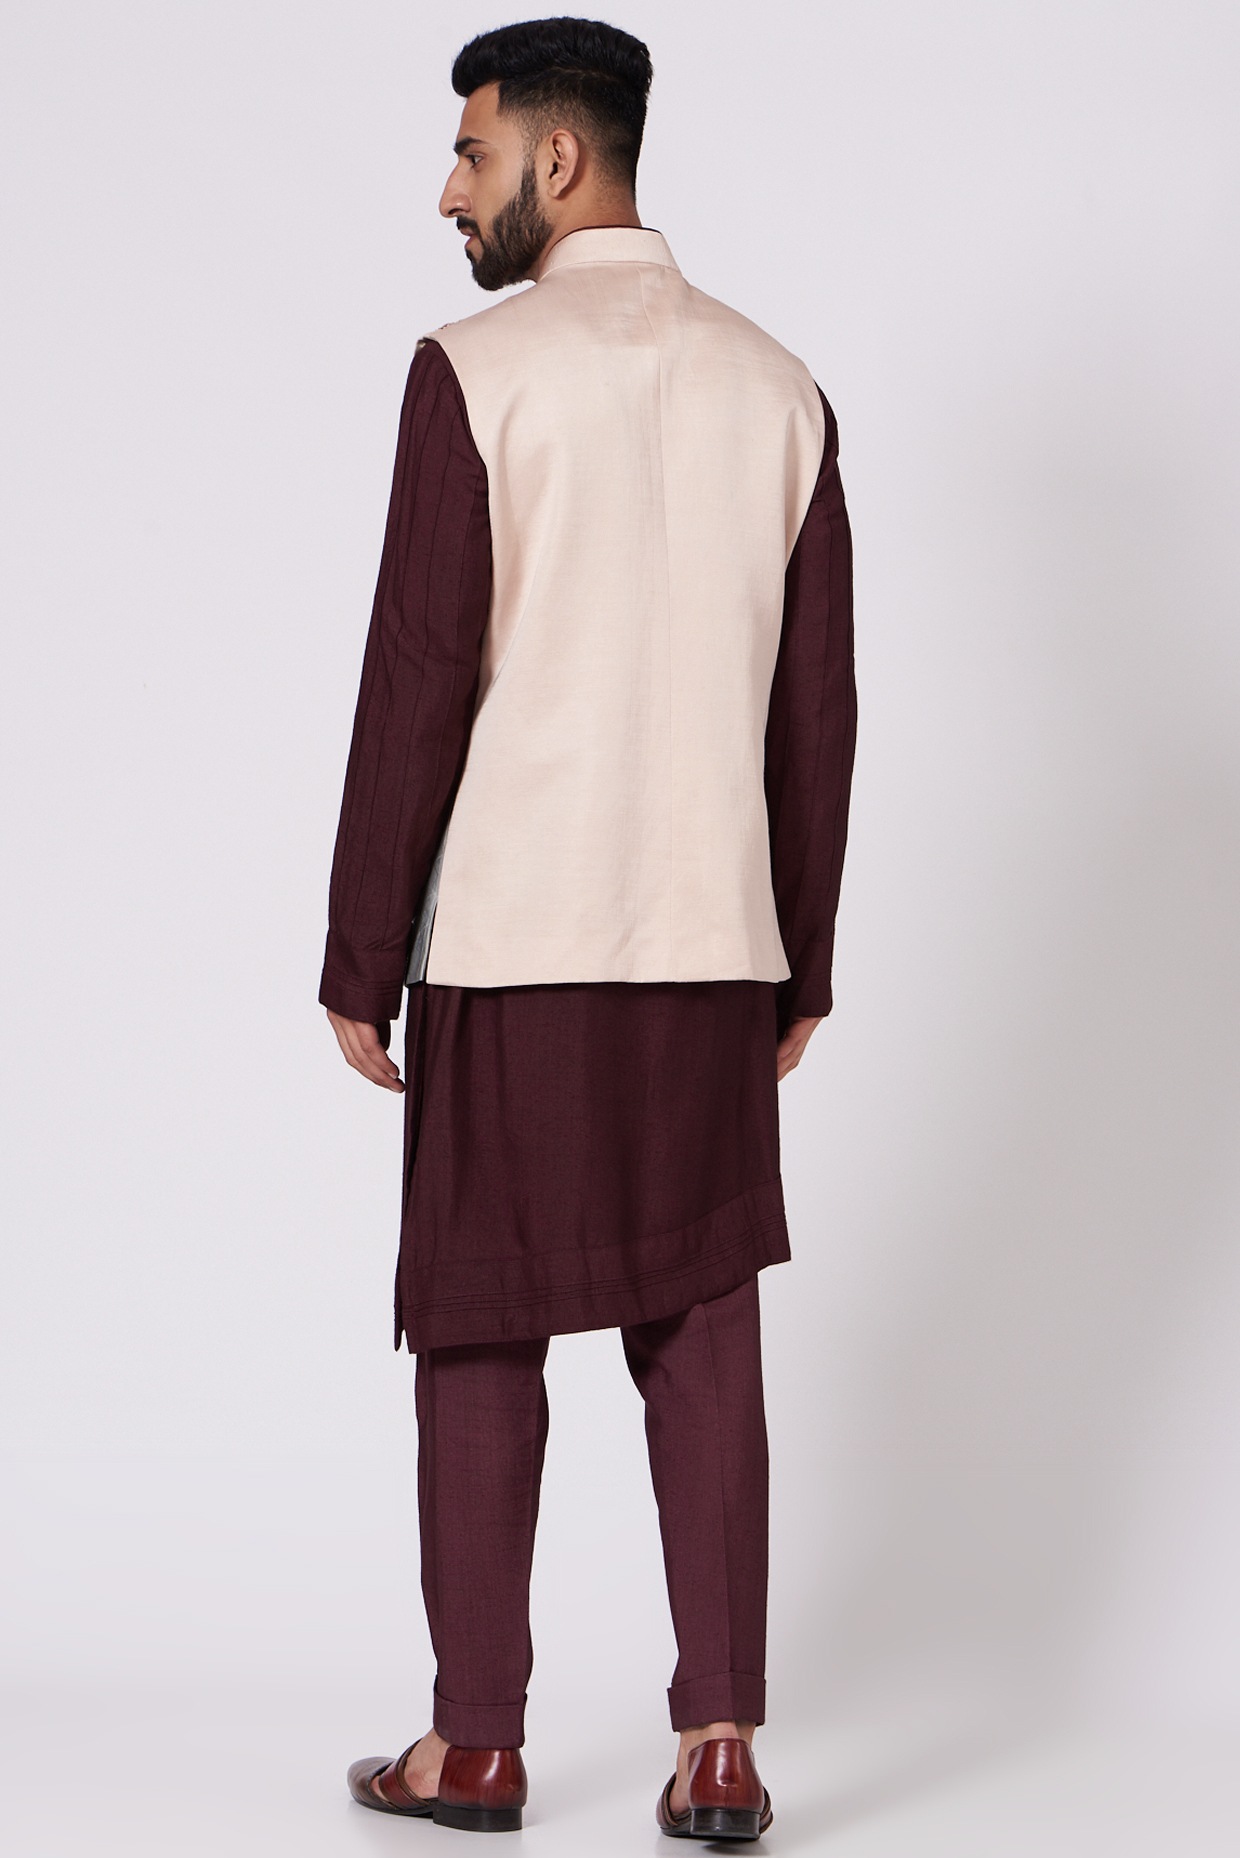 Indian Traditional Alluring Wine Velvet Nehru Jacket With Gold Kurta S –  Saris and Things